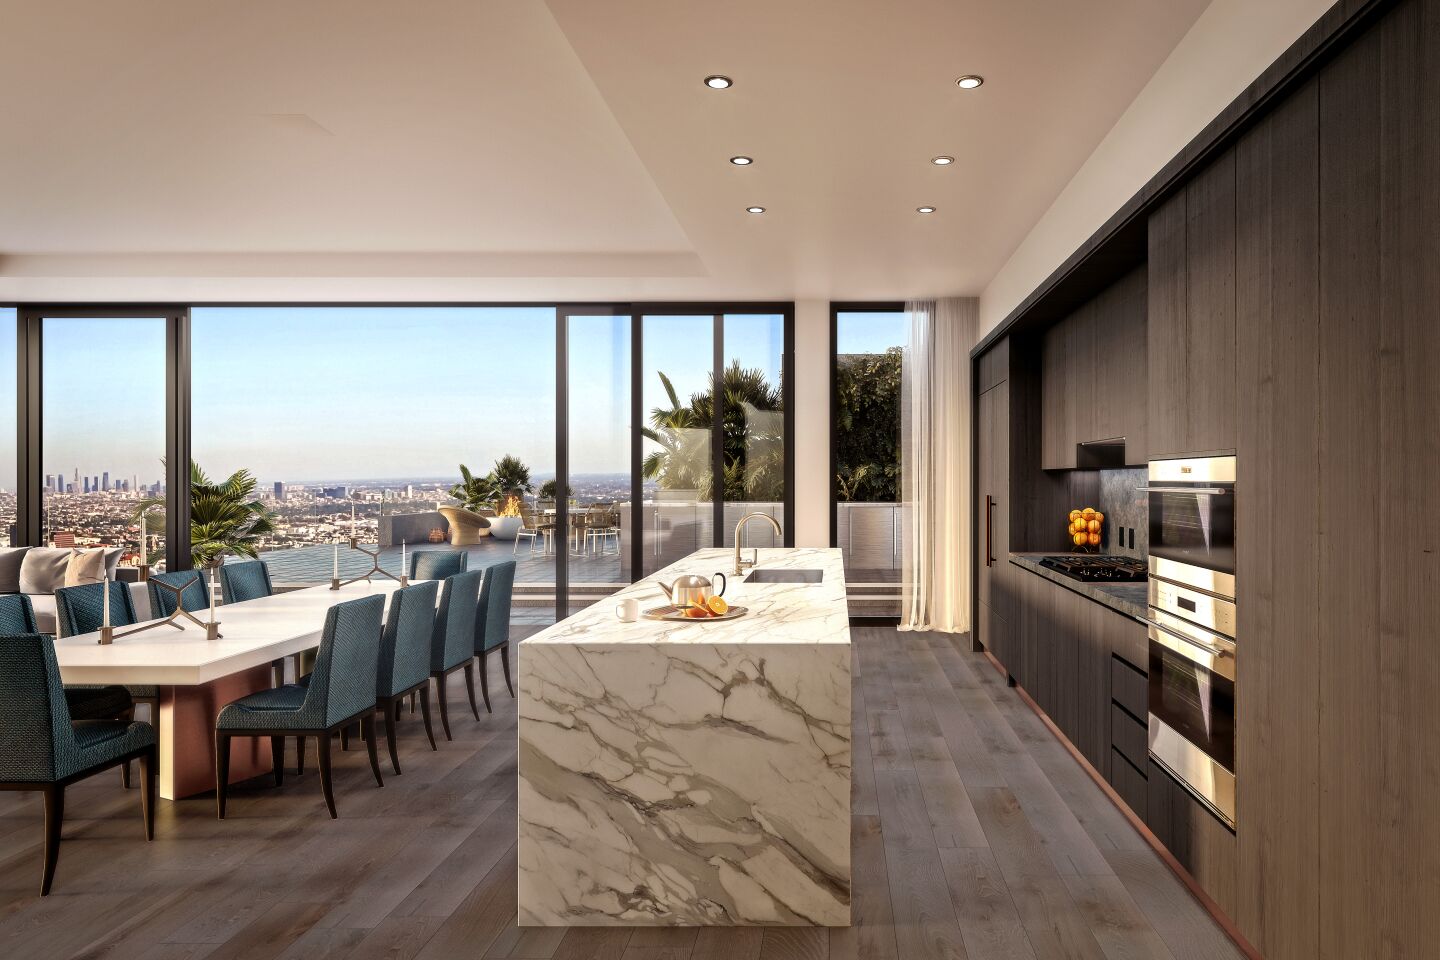 A rendering of the penthouse, designed by Martin Brudnizki in collaboration with Ehrlich Yanai Rhee Chaney Architects.